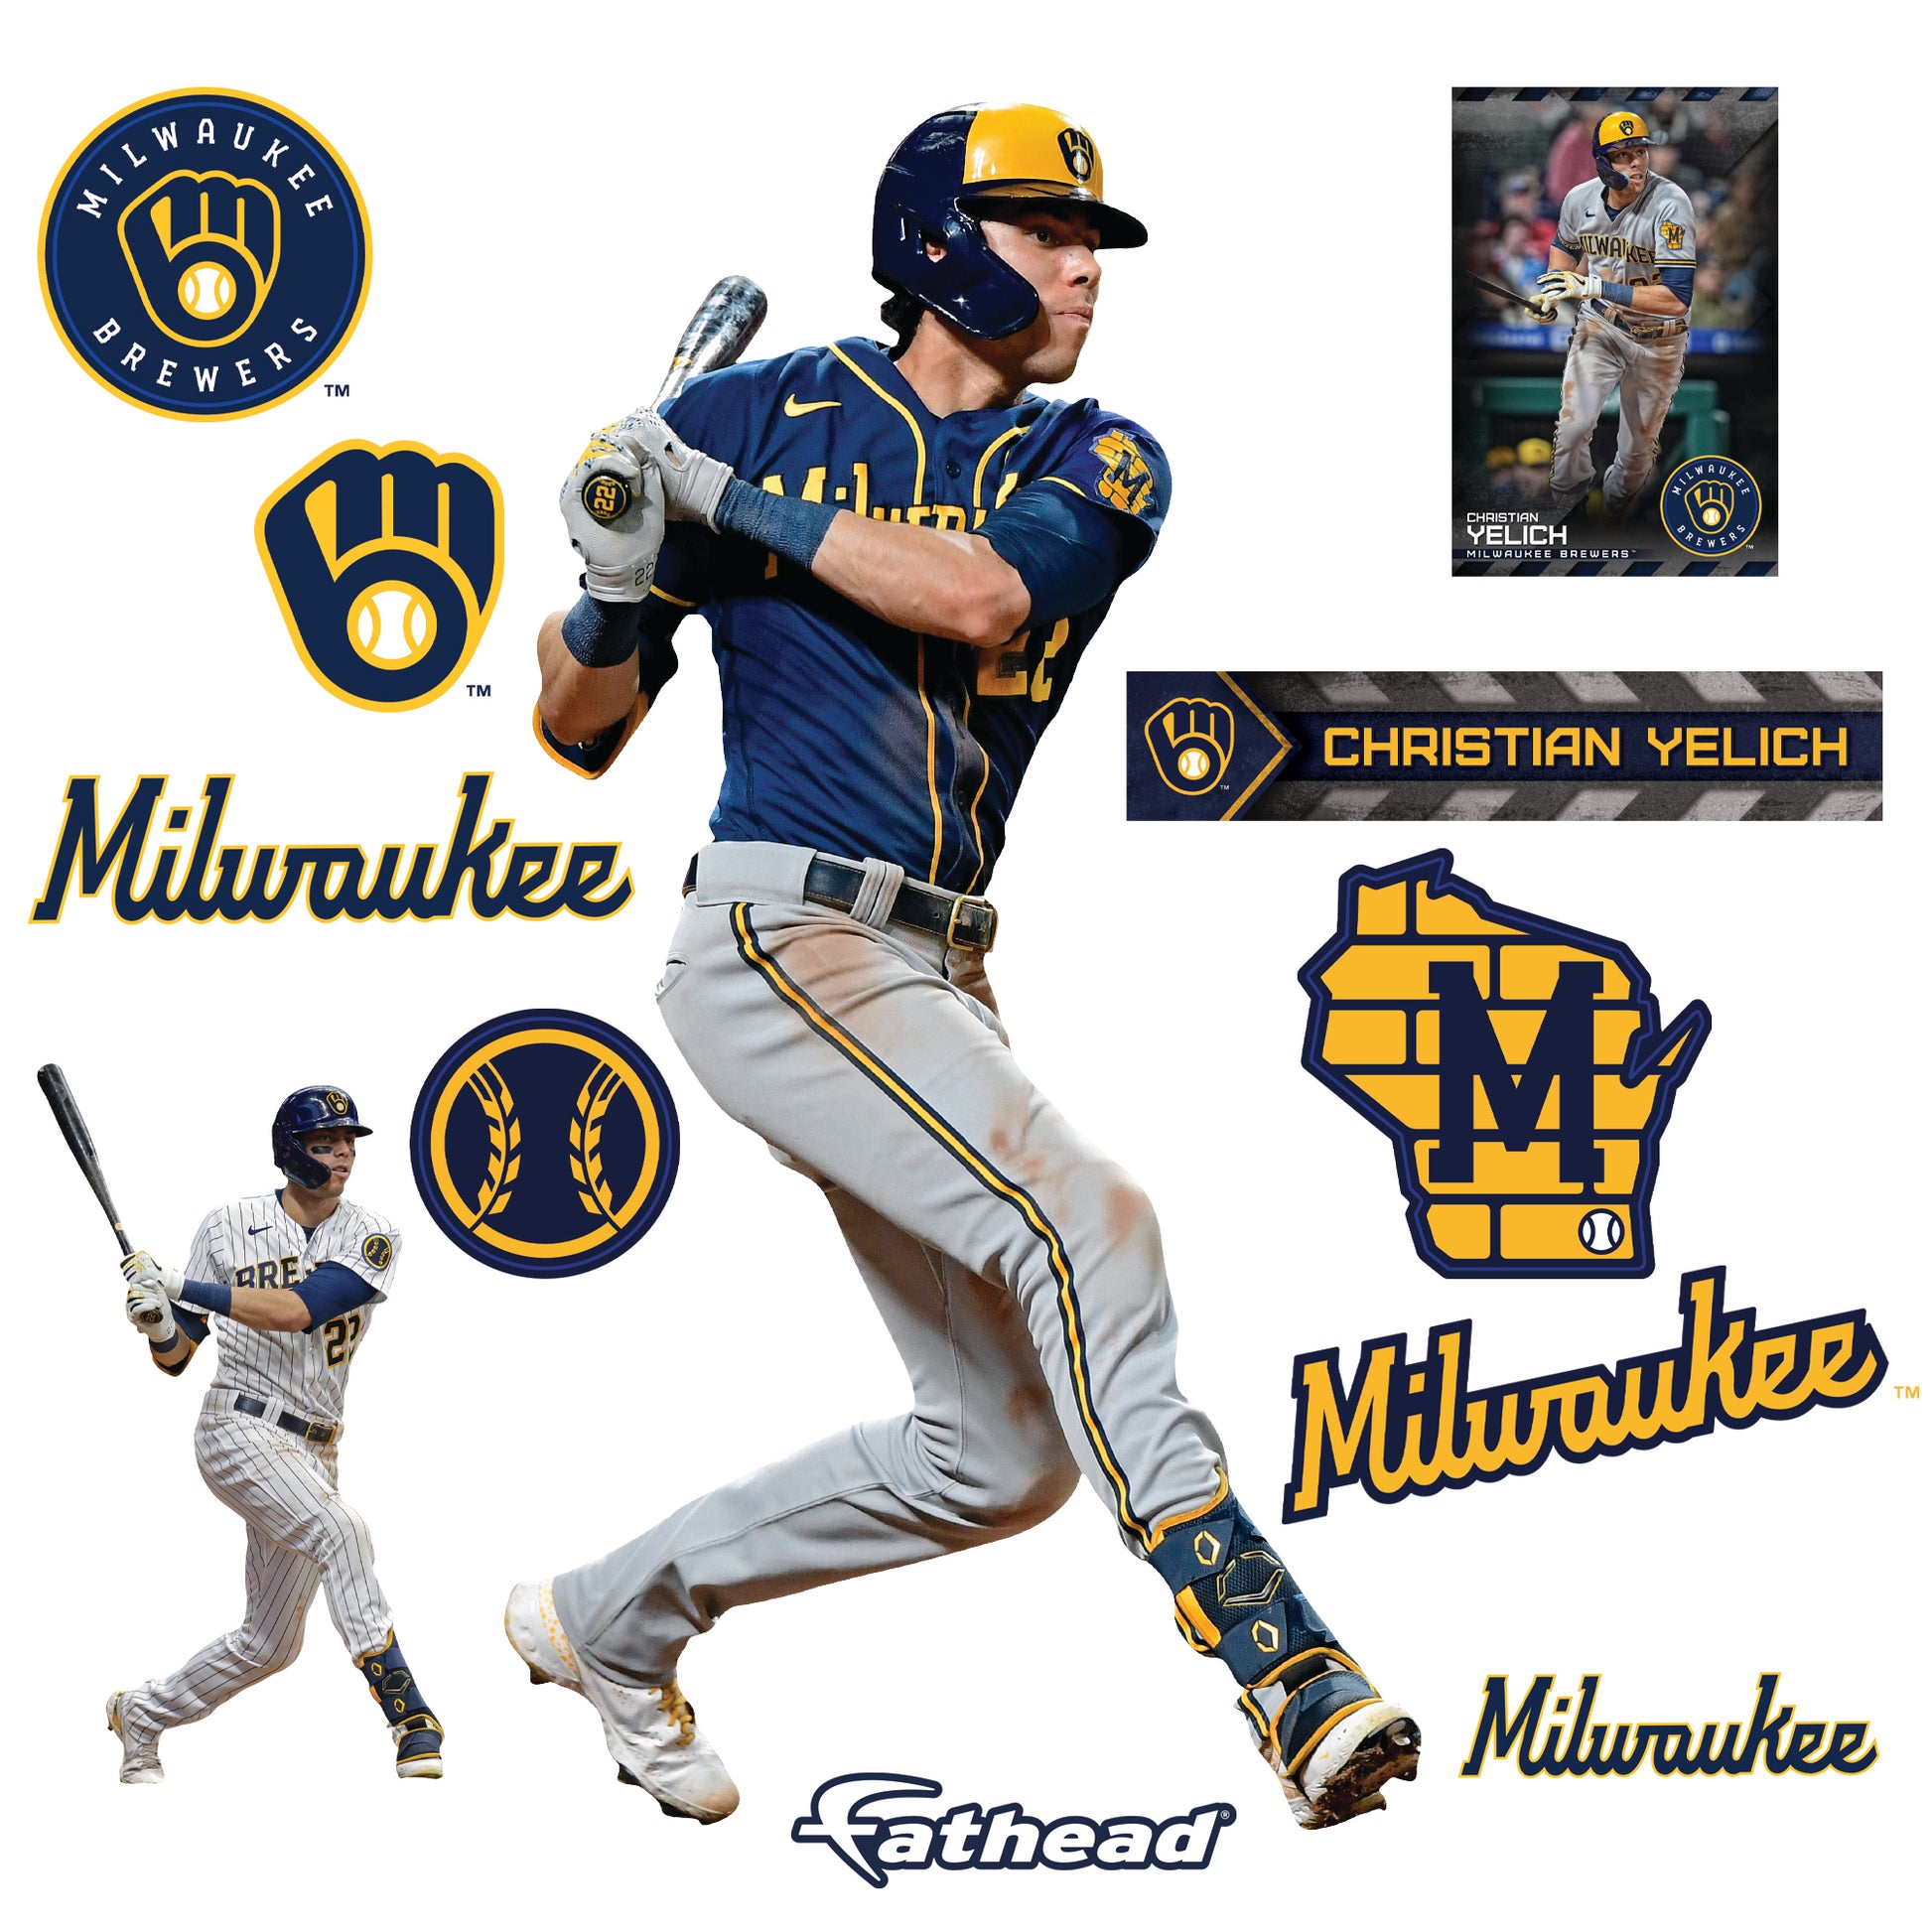 Milwaukee Brewers: Christian Yelich 2021 - MLB Removable Wall Adhesive Wall Decal XL